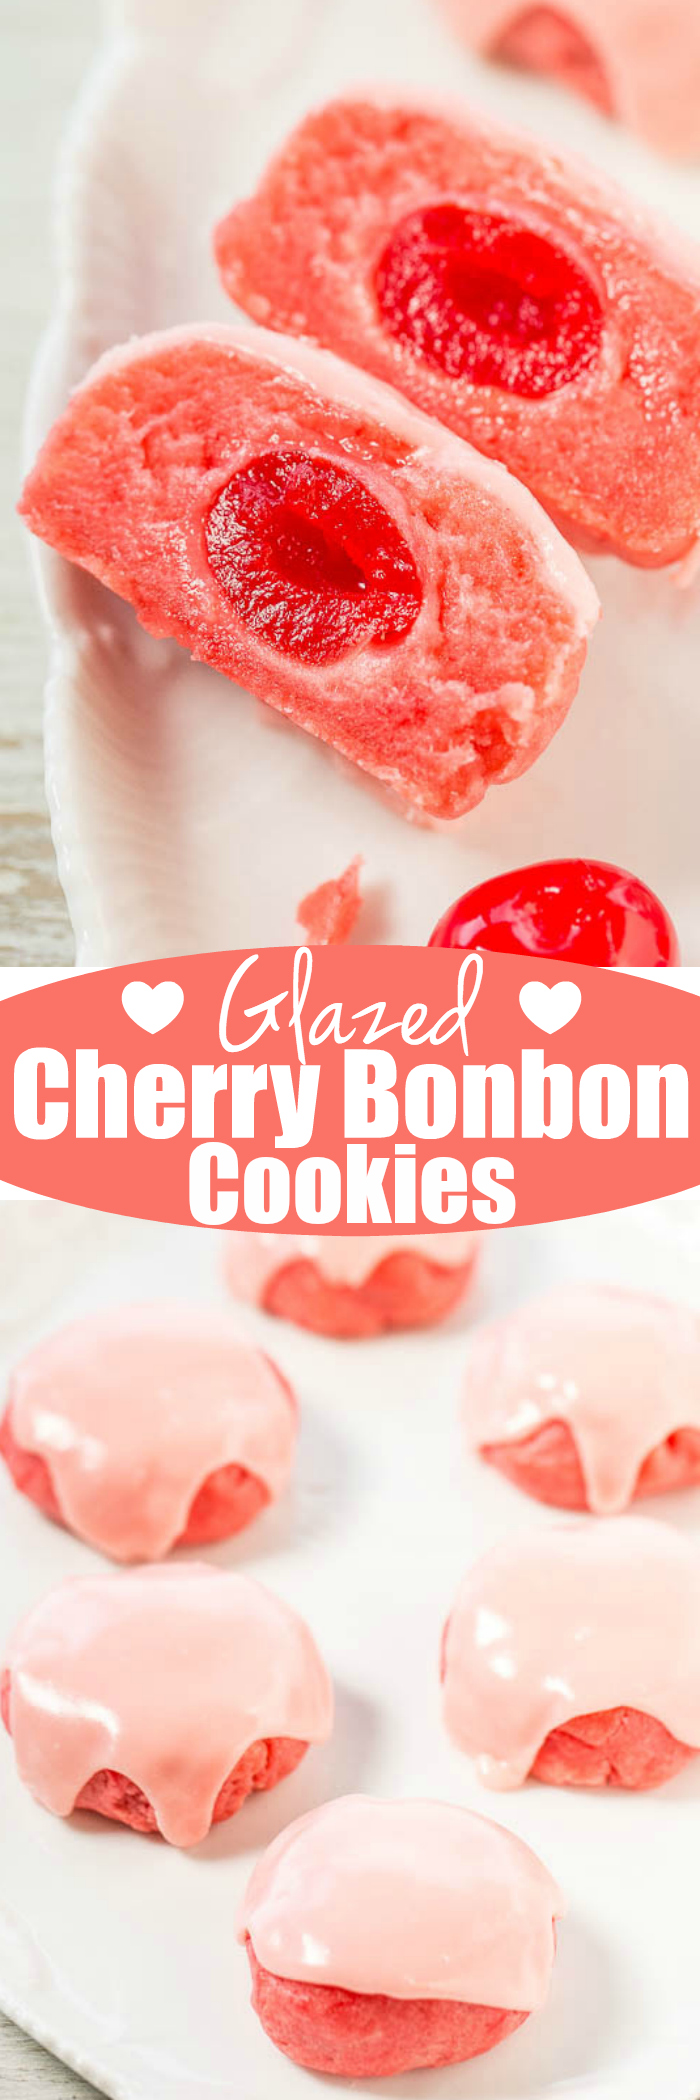 Glazed Maraschino Cherry Cookies — Soft, buttery cookies with the fun surprise of a cherry baked in!! The cherry juice glaze boosts the cherry flavor even more! Easy cookies that make everyone smile!!